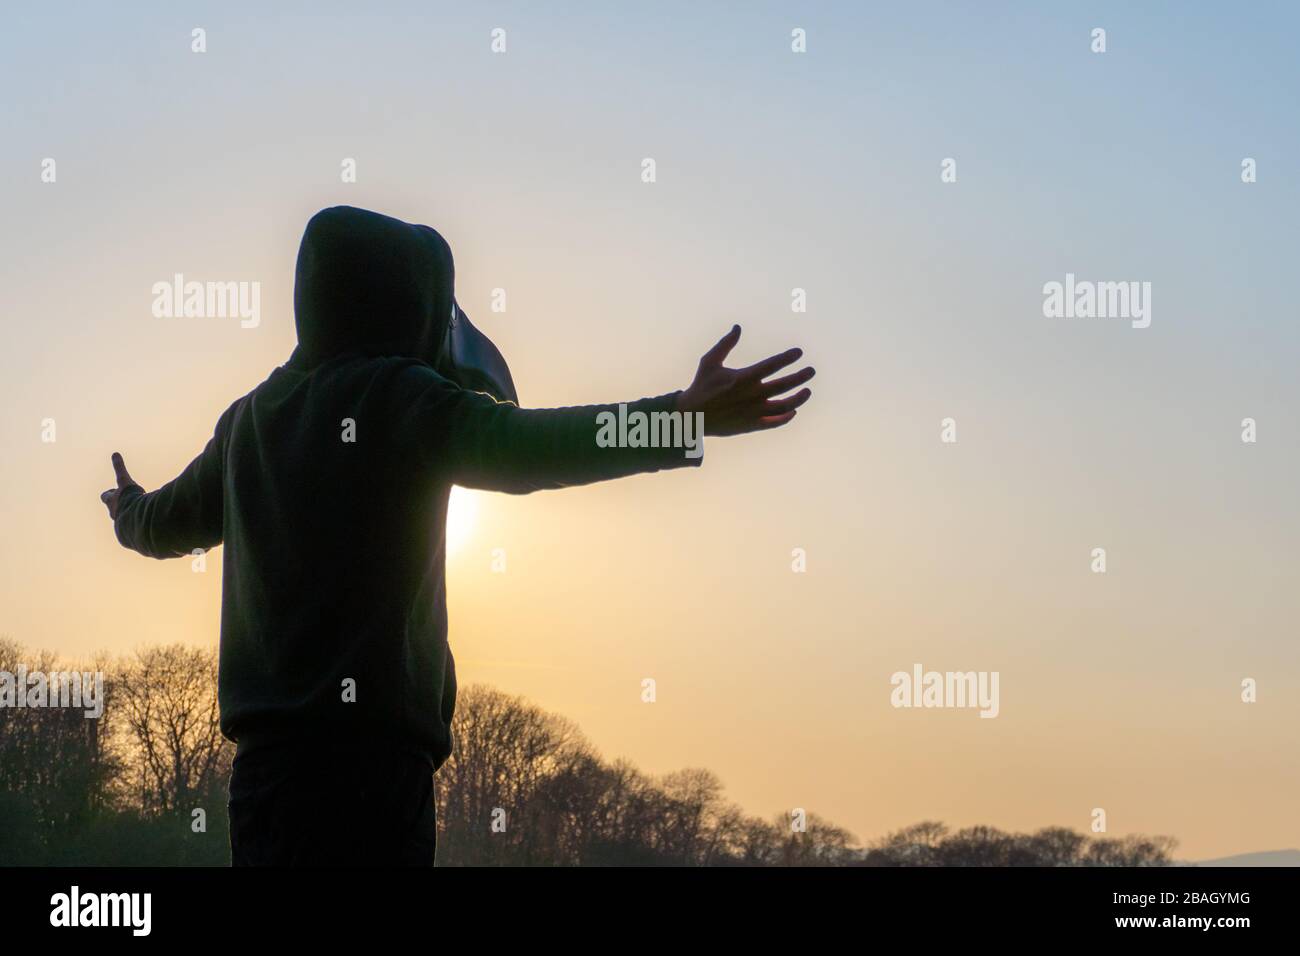 A hooded figure wearing a plague doctor mask, with arms out stretched. At sunset on a winters day. Stock Photo